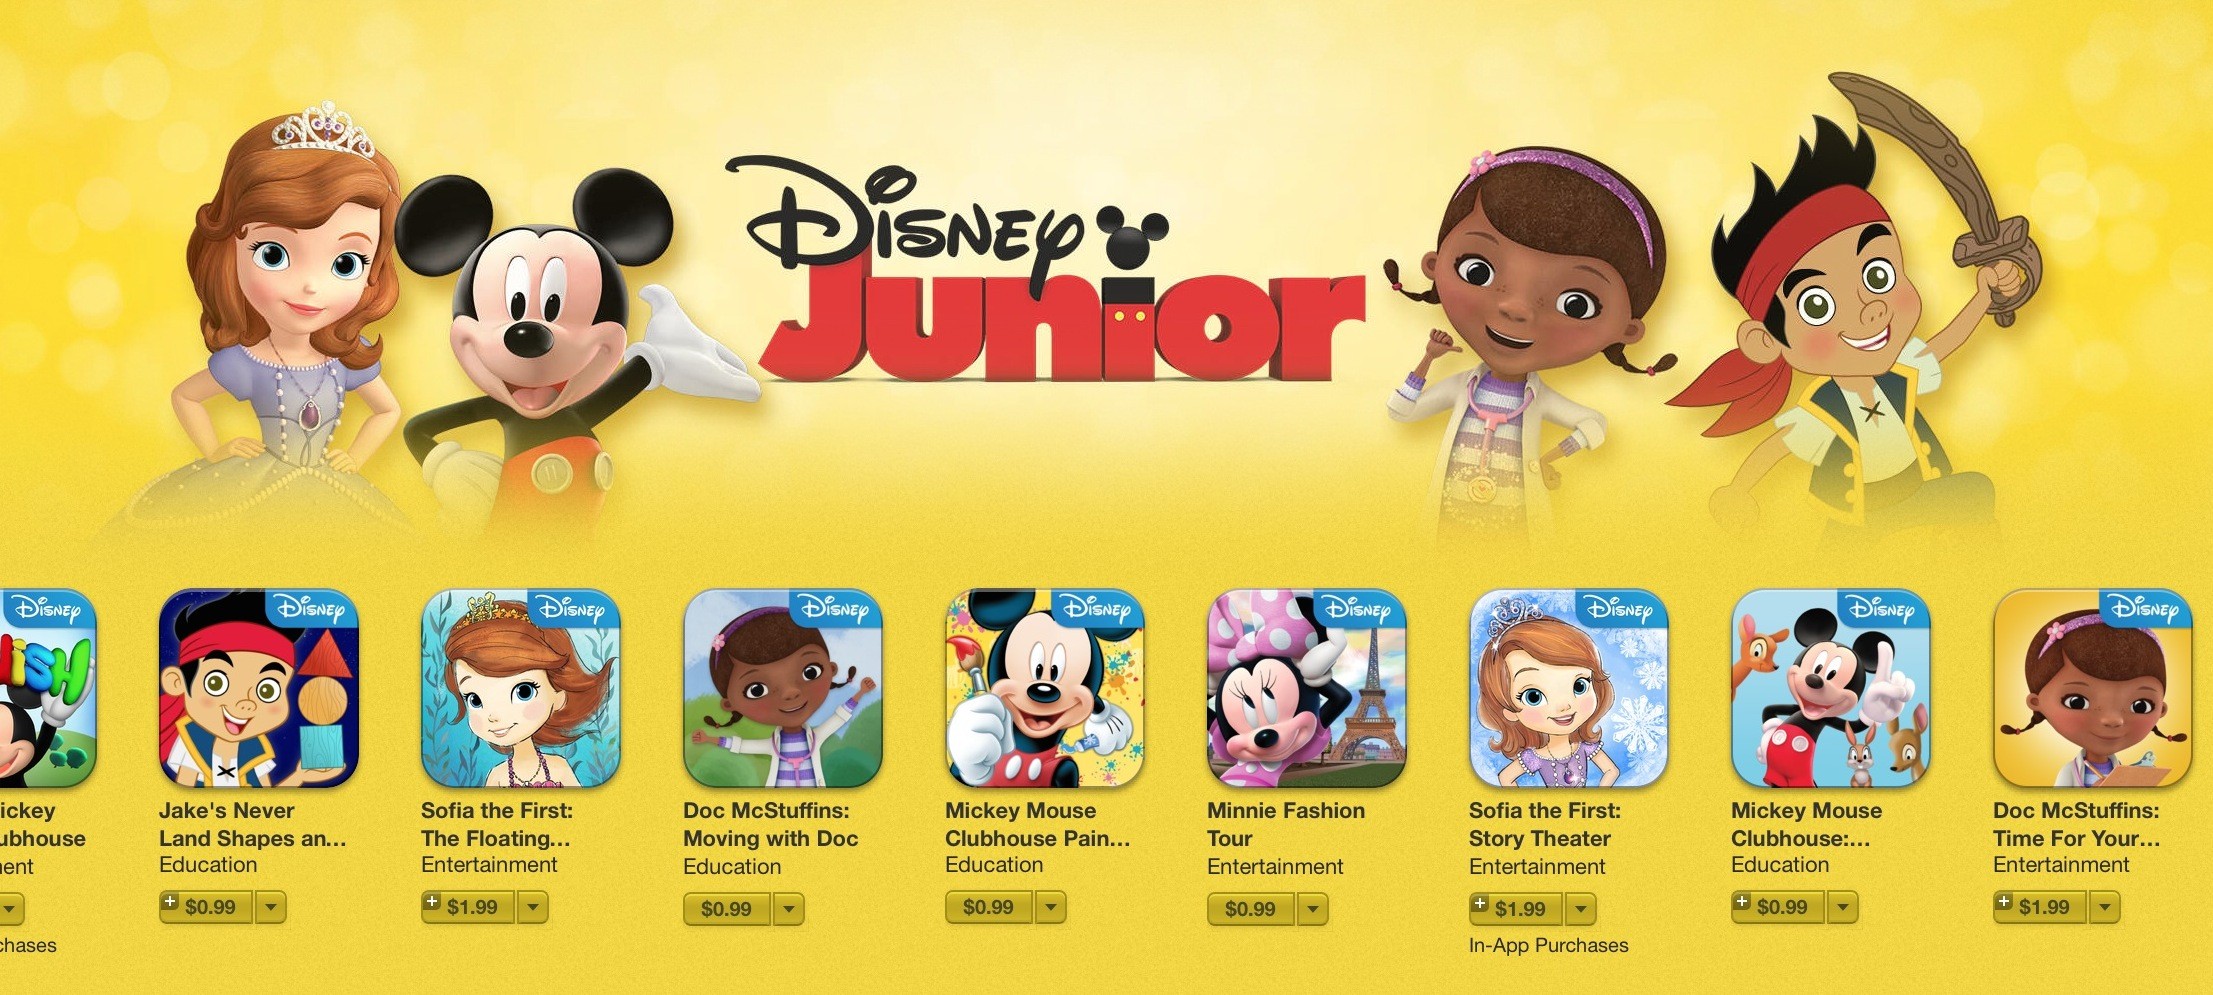 Disney Junior Apps, Discounted in the AppStore